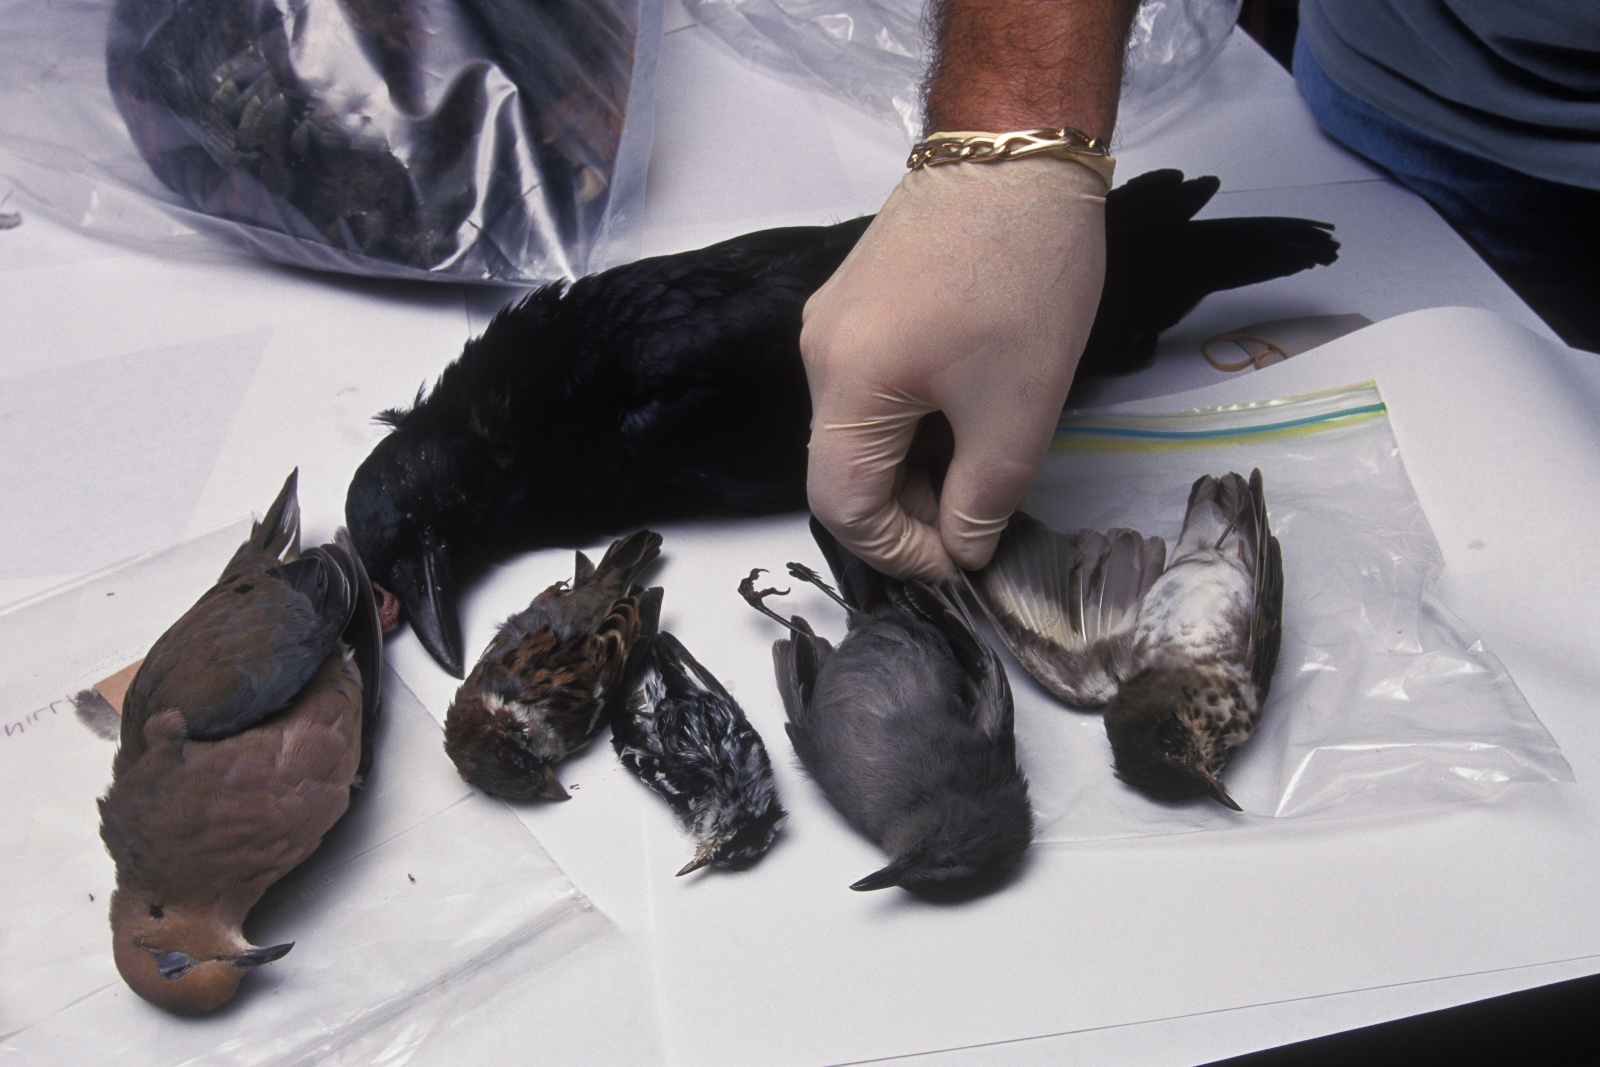 A scientist wearing a latex glove examines six dead birds suspected of dying of the West Nile virus